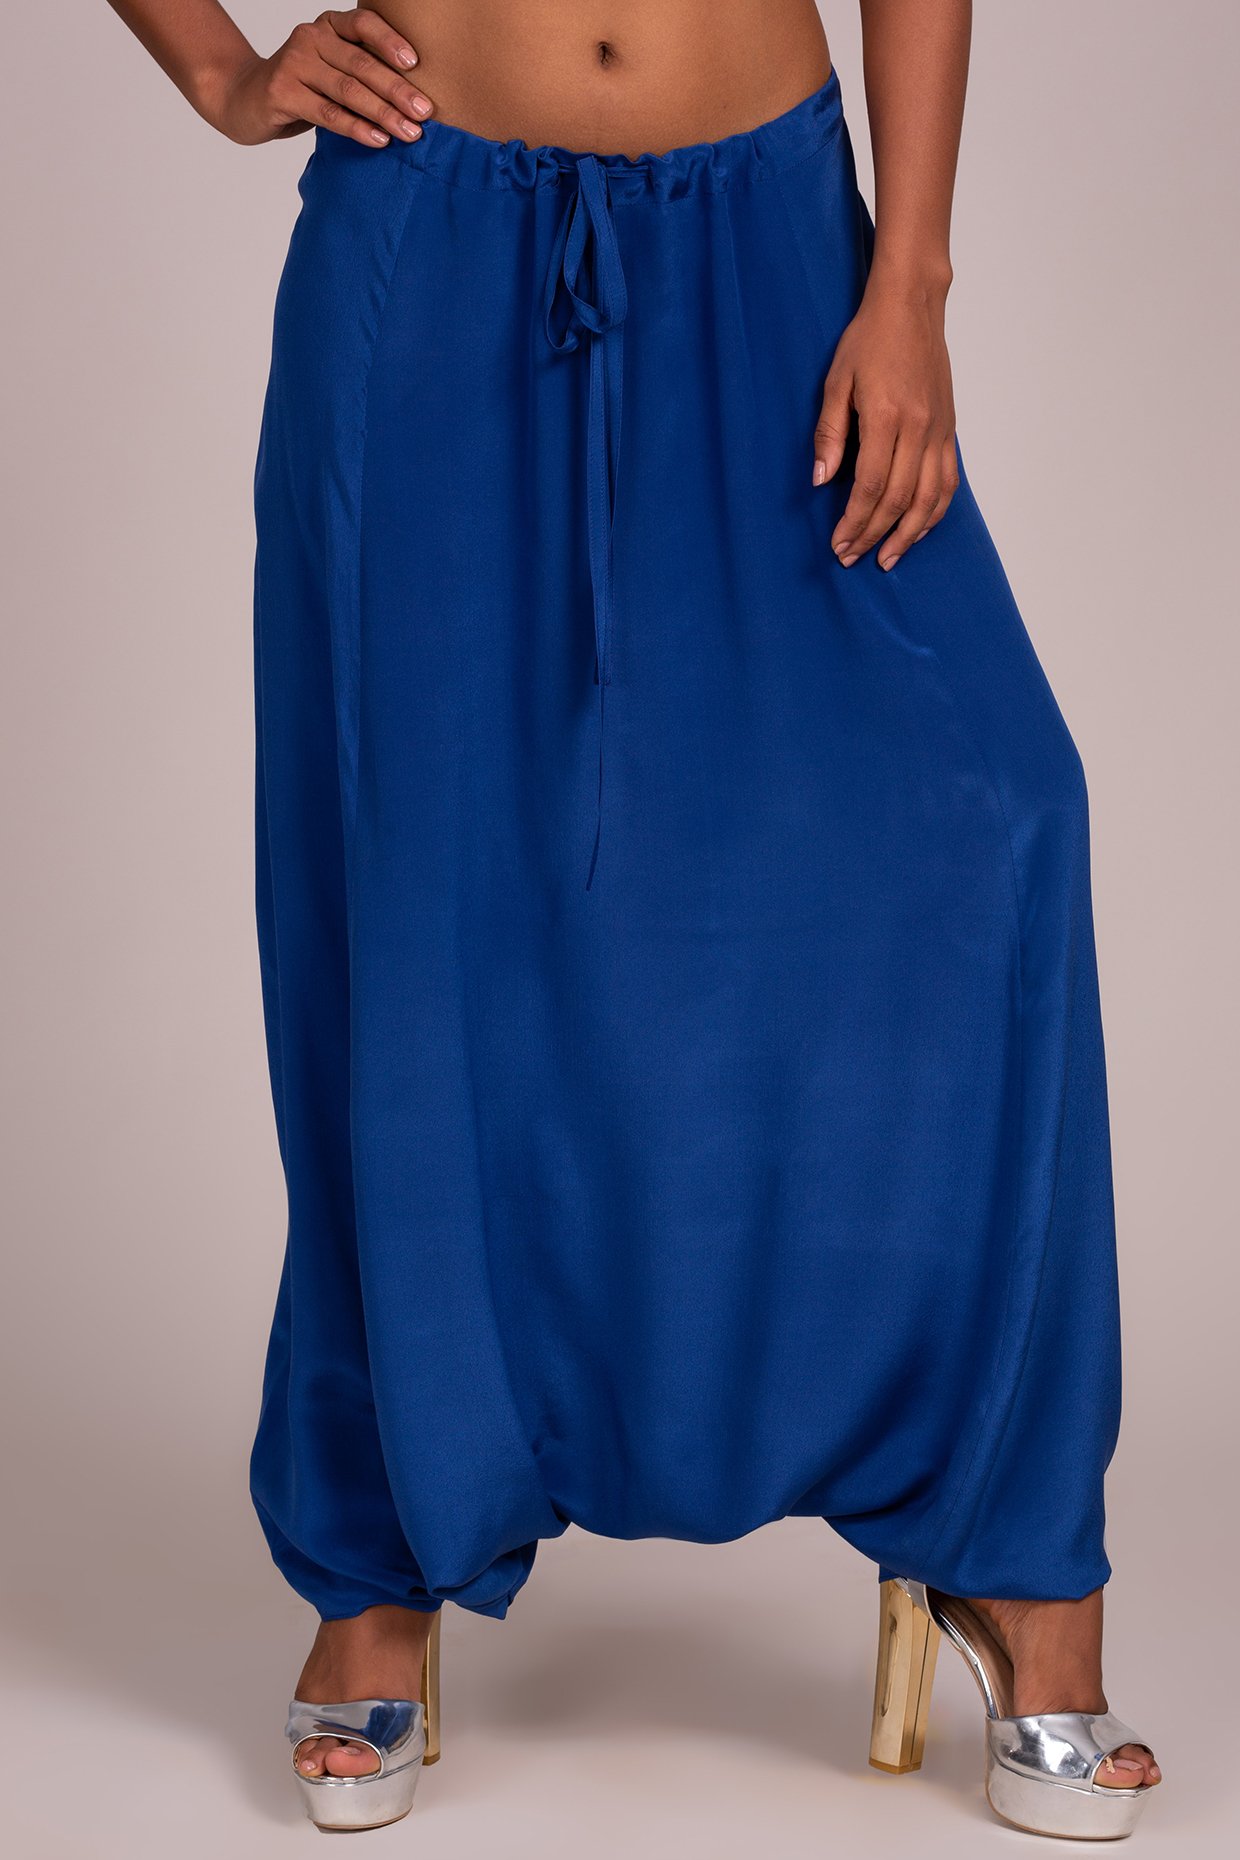 Rabia Dhoti & Top - Laality | Indo-Western Clothing for Women